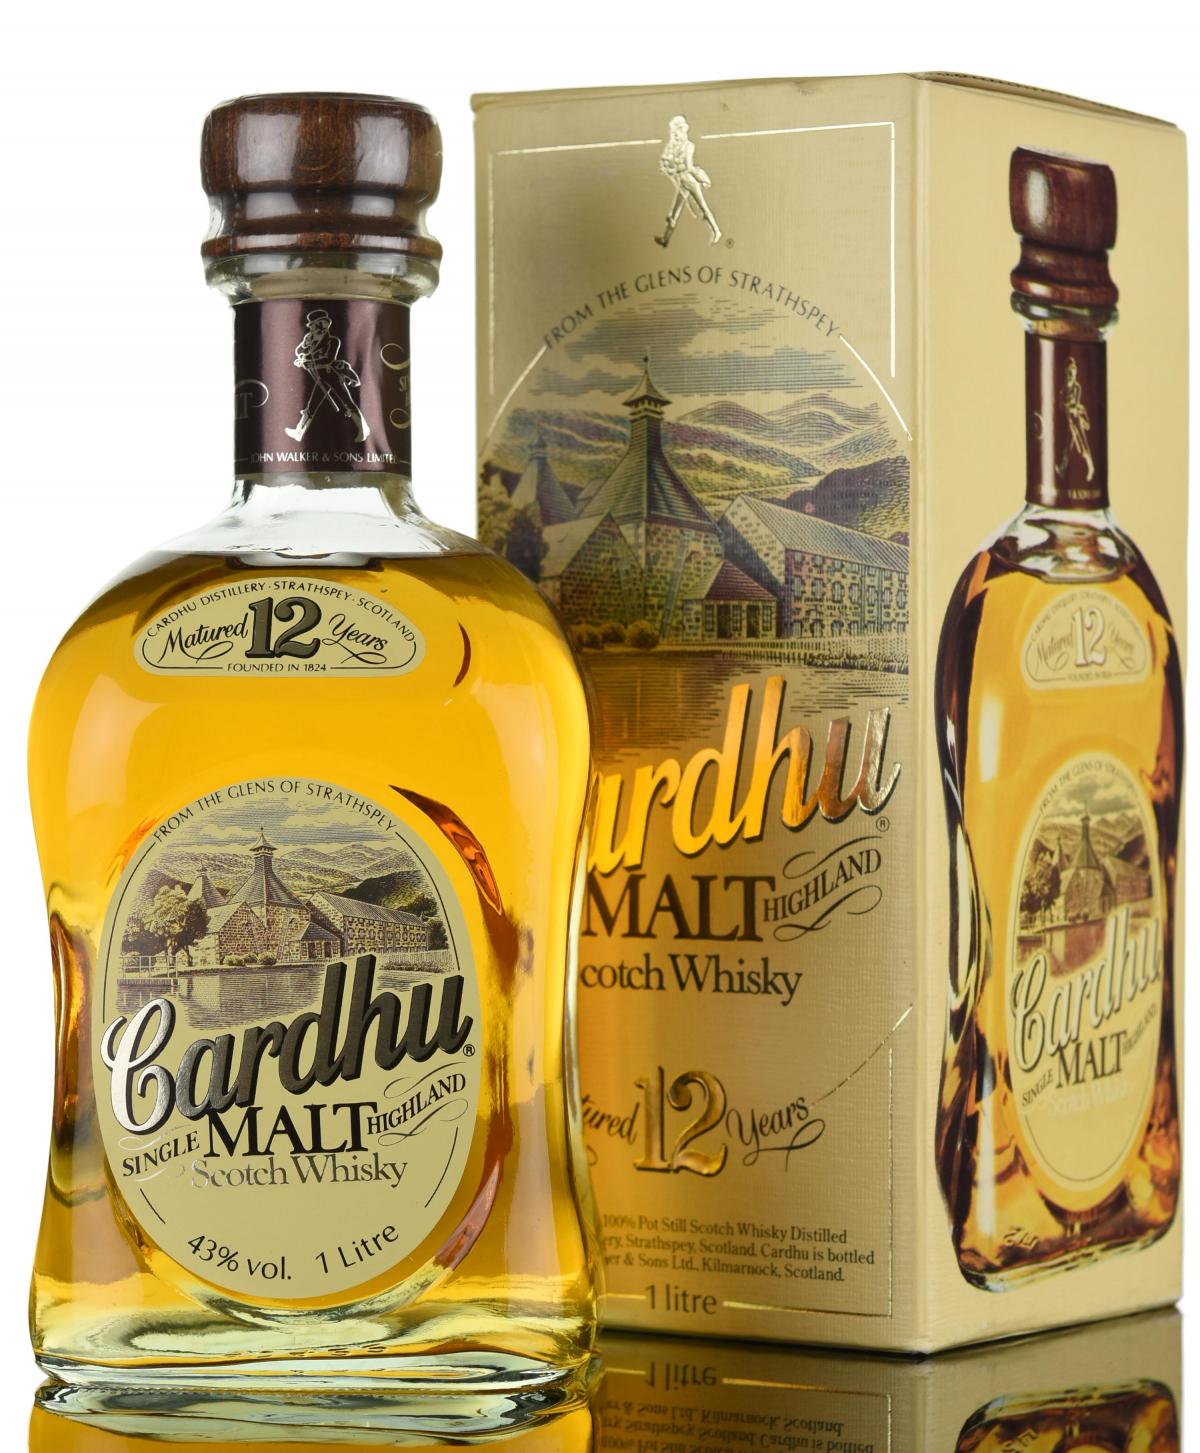 Cardhu 12 Year Old - 1980s - 1 Litre